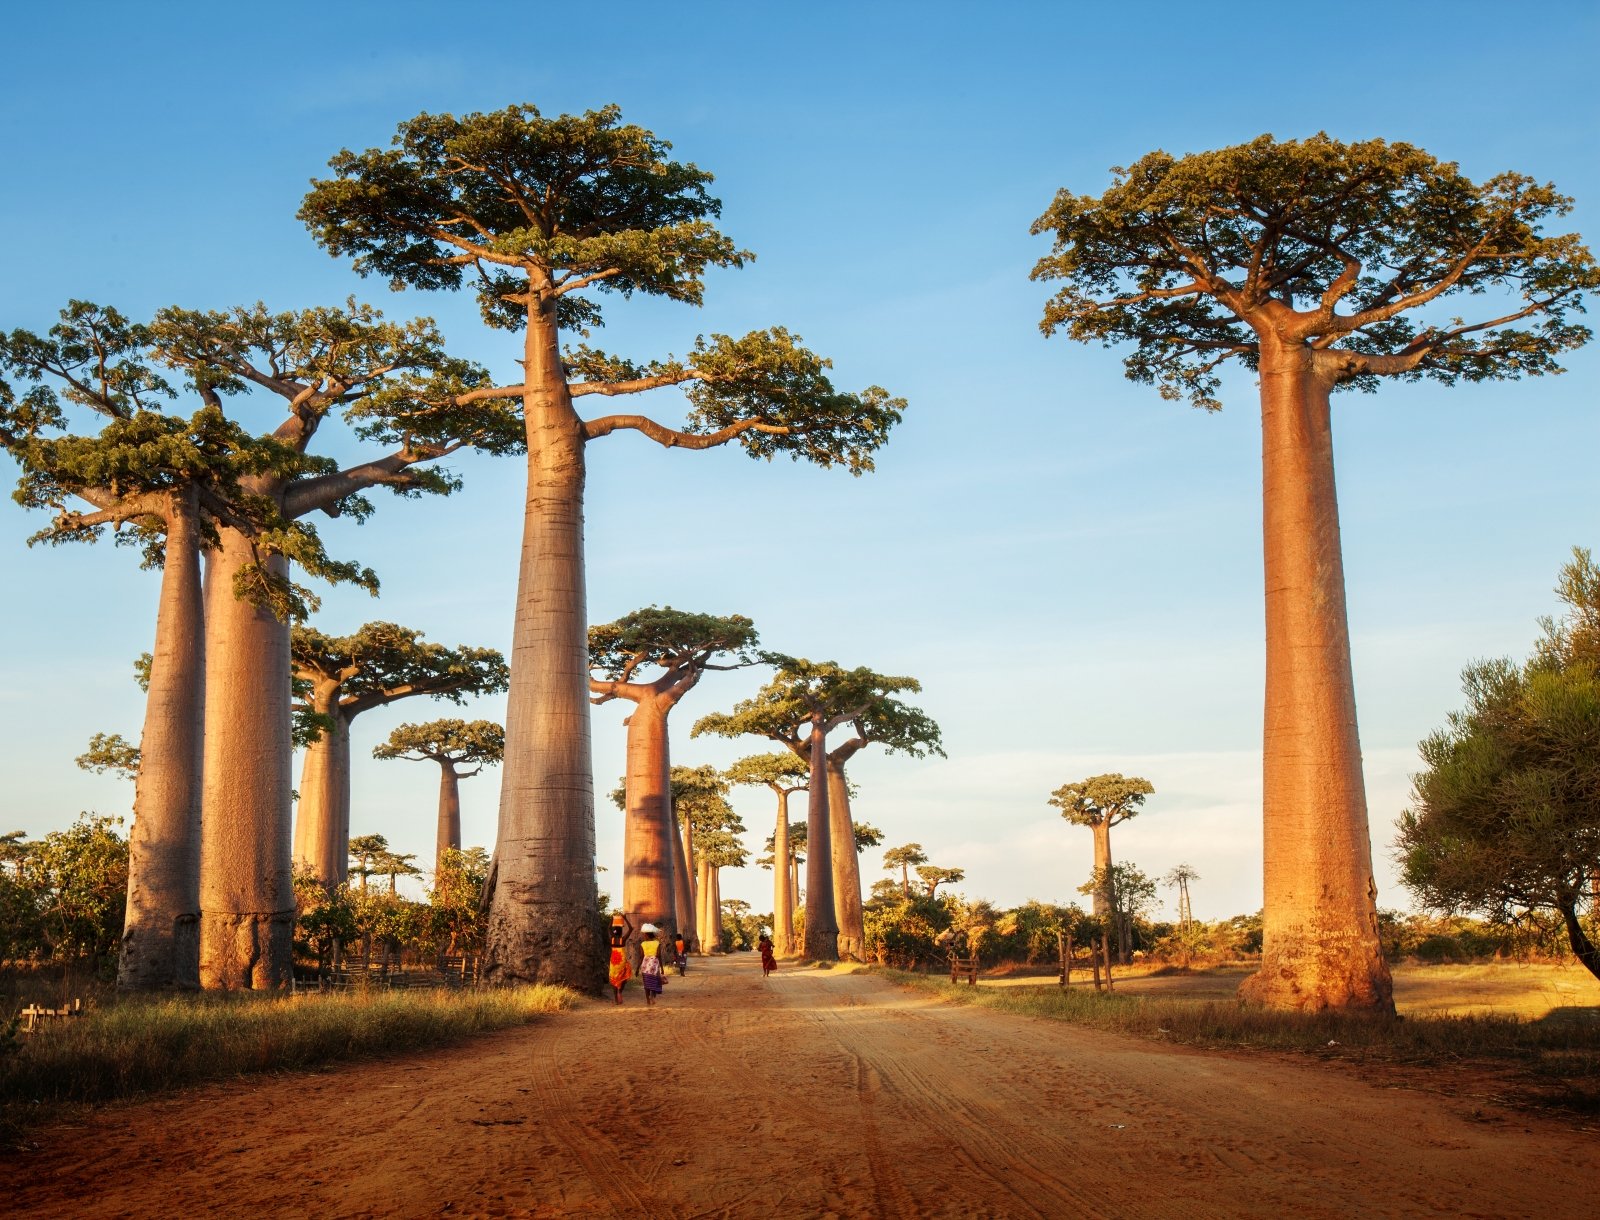 <p>Africa is a vast continent with a plethora of diverse and unique destinations. However, there are still some hidden gems that have yet to be discovered by the masses. Here are three must-visit places in Africa that you may have never heard of before.</p>